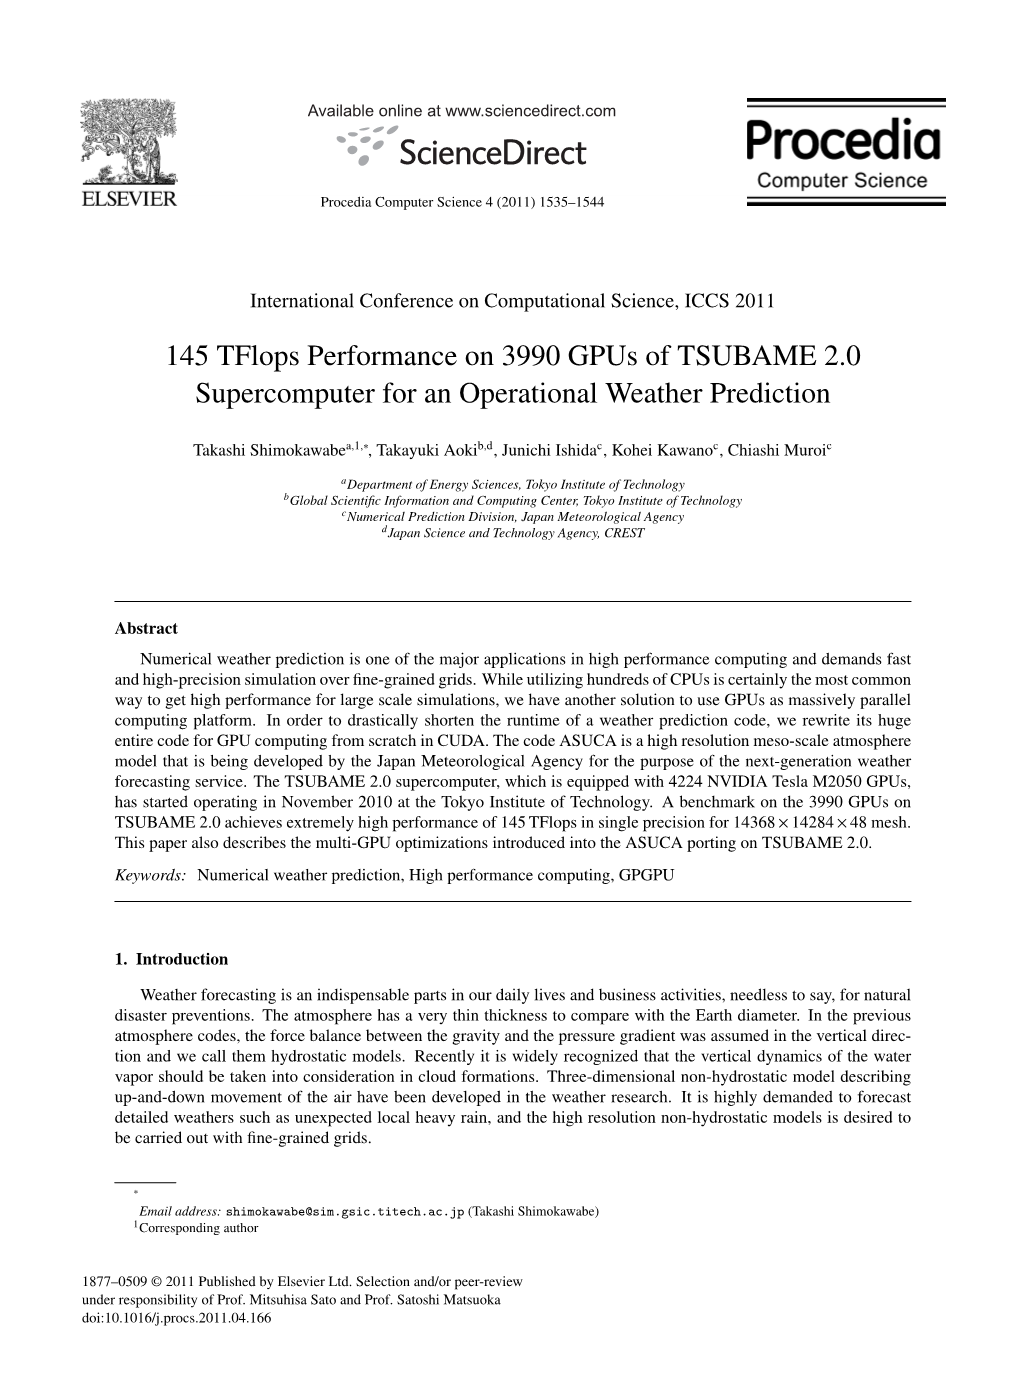 145 Tflops Performance on 3990 Gpus of TSUBAME 2.0 Supercomputer for an Operational Weather Prediction